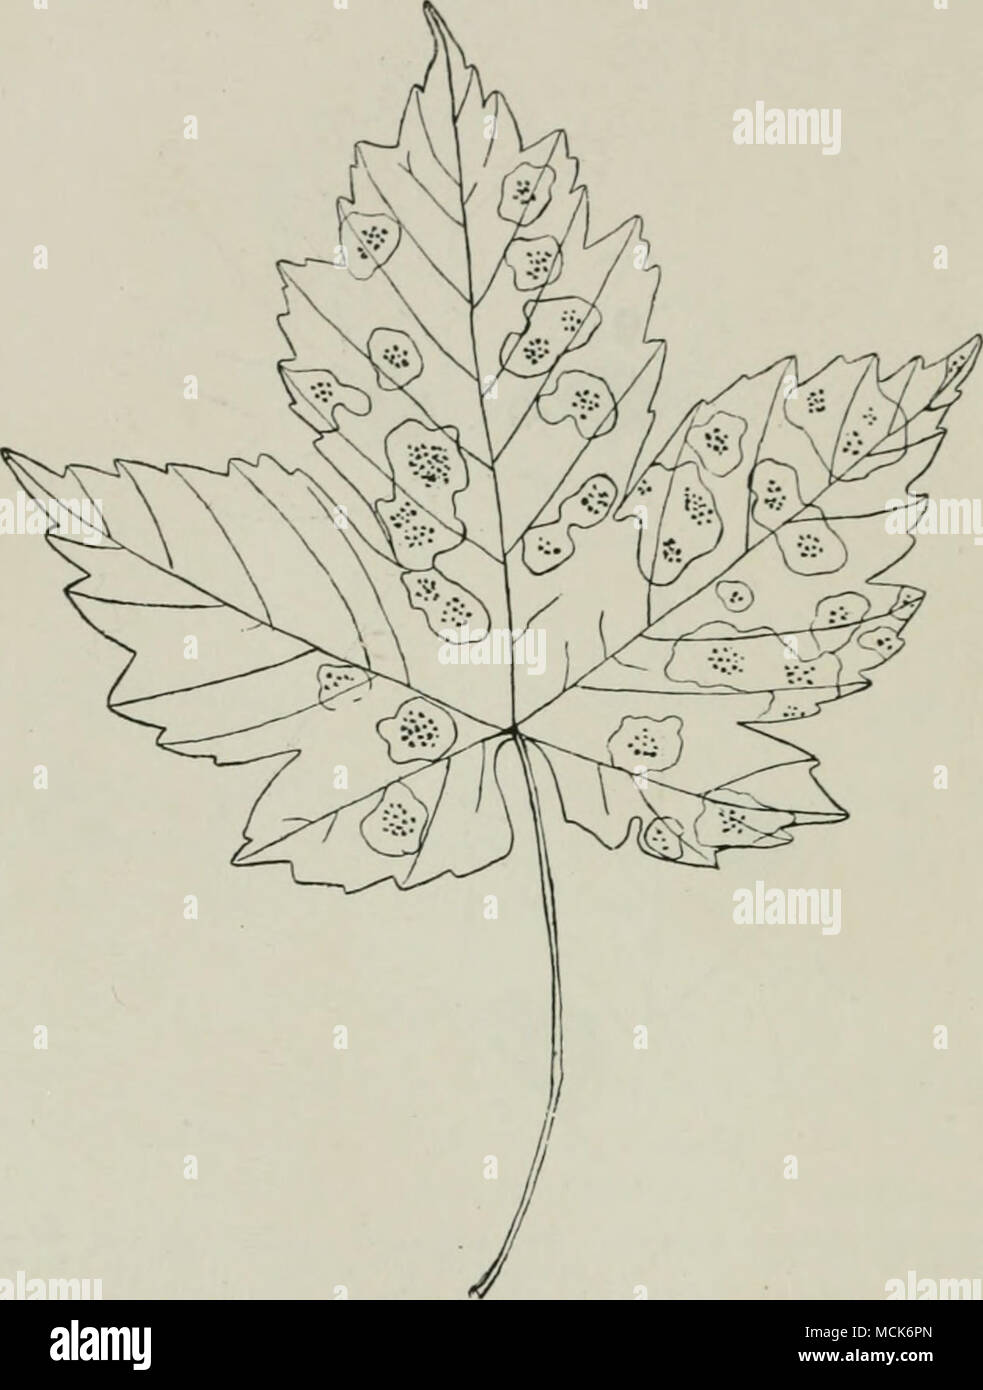 . Fio. 129 —Rhytisma punctatum. Leaf of Acer Pseudoplatami.s with apothecia; the leaf is yellow, but the spots enclosing the apothecia are still green, (v. Tubeuf del.) black in colour, angular, and scattered over the whole leaf- surface. After the leaf has turned yellow, portions of it sur- rounding spots of this Rhytisma retain their green colour, so that we have black spots on green islands in the yellow leaf. The sclerotia dehisce by valves. The apothecia contain thread- like paraphyses and asci. The asci are club-shaped and contain Stock Photo